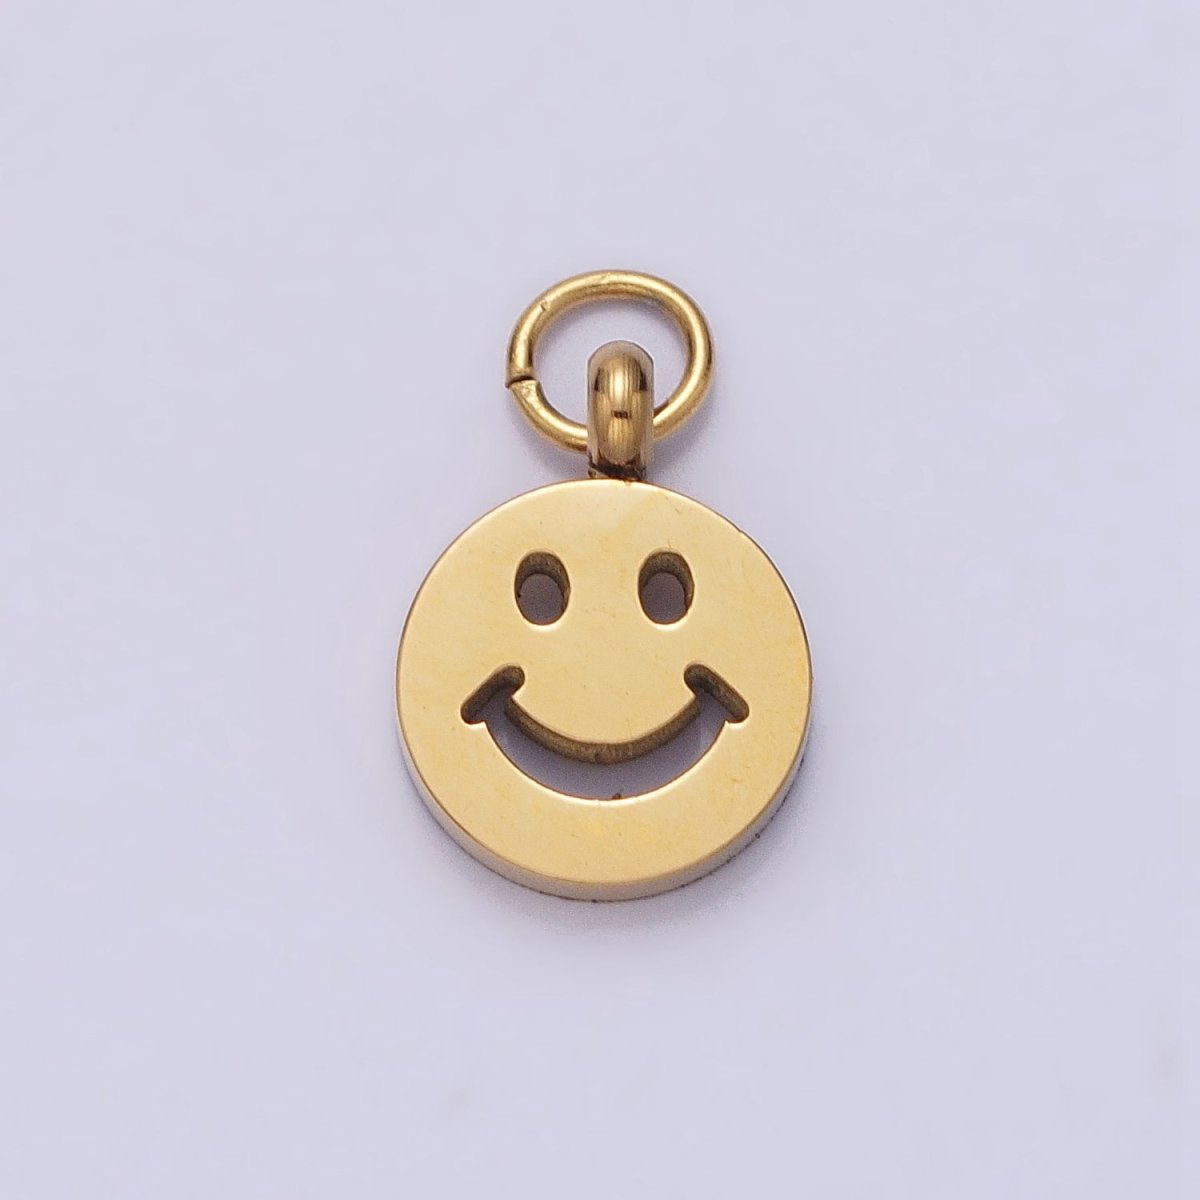 Stainless Steel Smiley Face 8mm, 12mm Round Charm in Gold & Silver | P-882 P-883 - DLUXCA